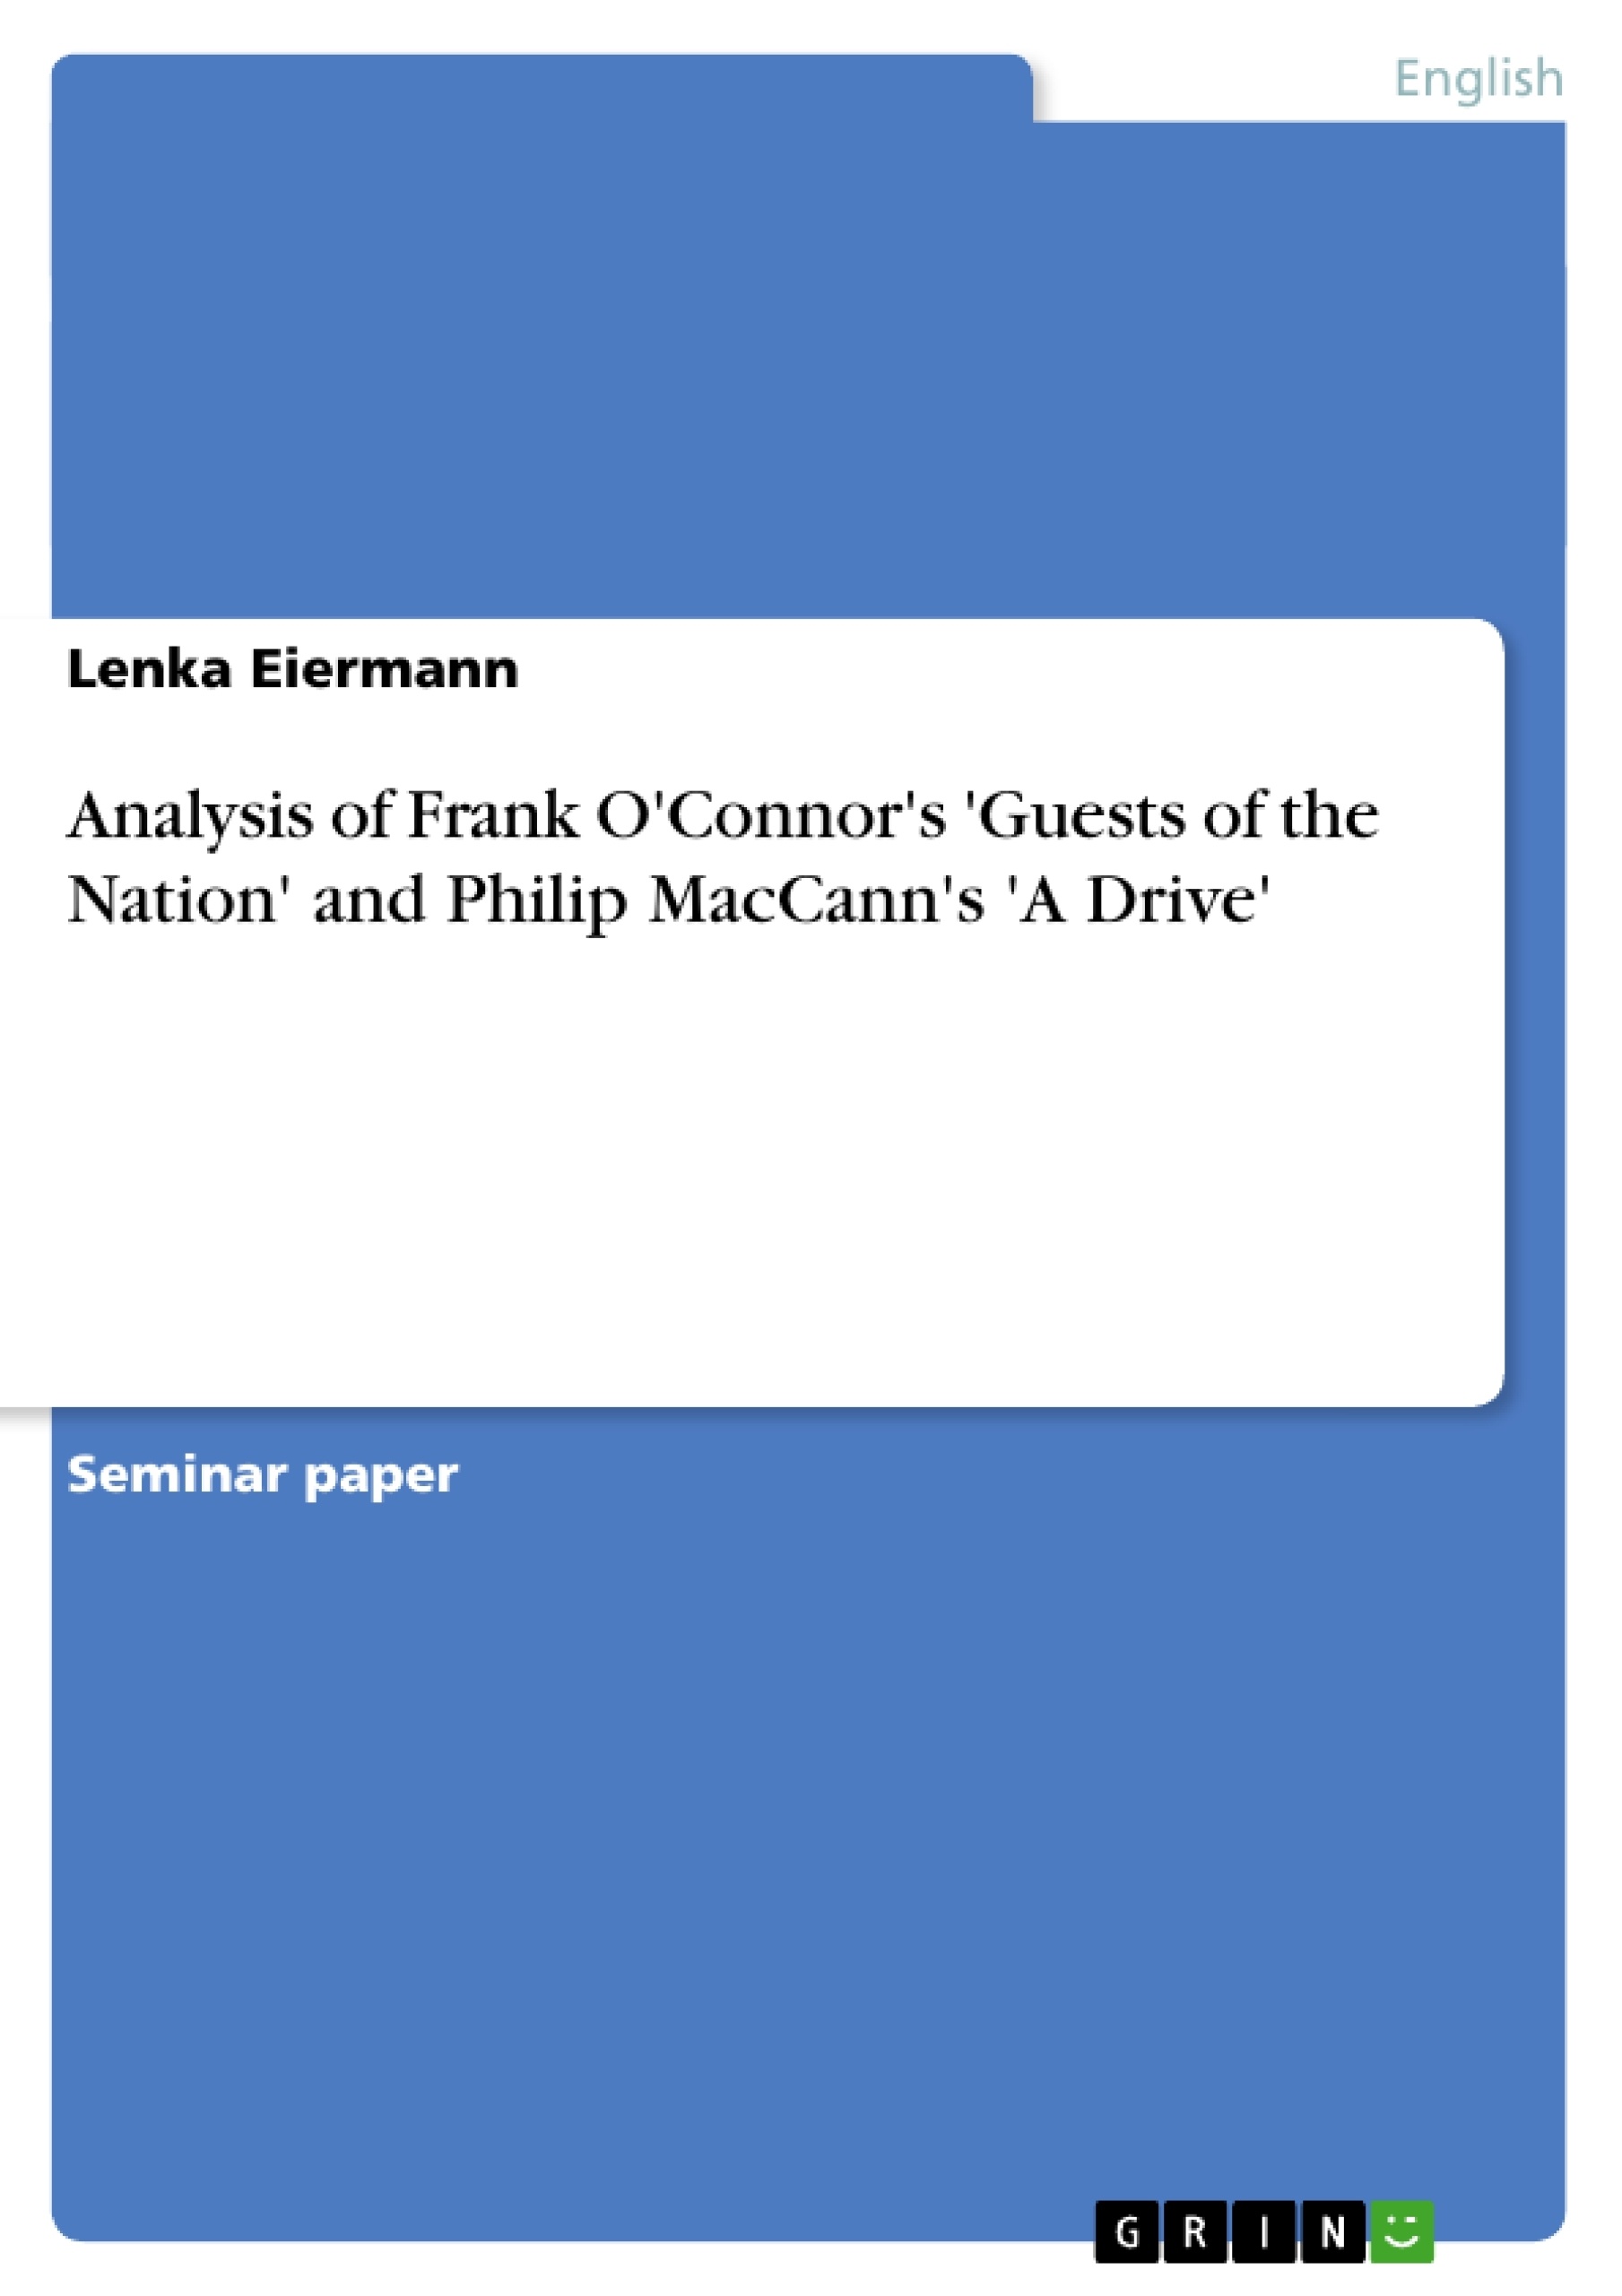 Título: Analysis of Frank O'Connor's 'Guests of the Nation' and Philip MacCann's 'A Drive'